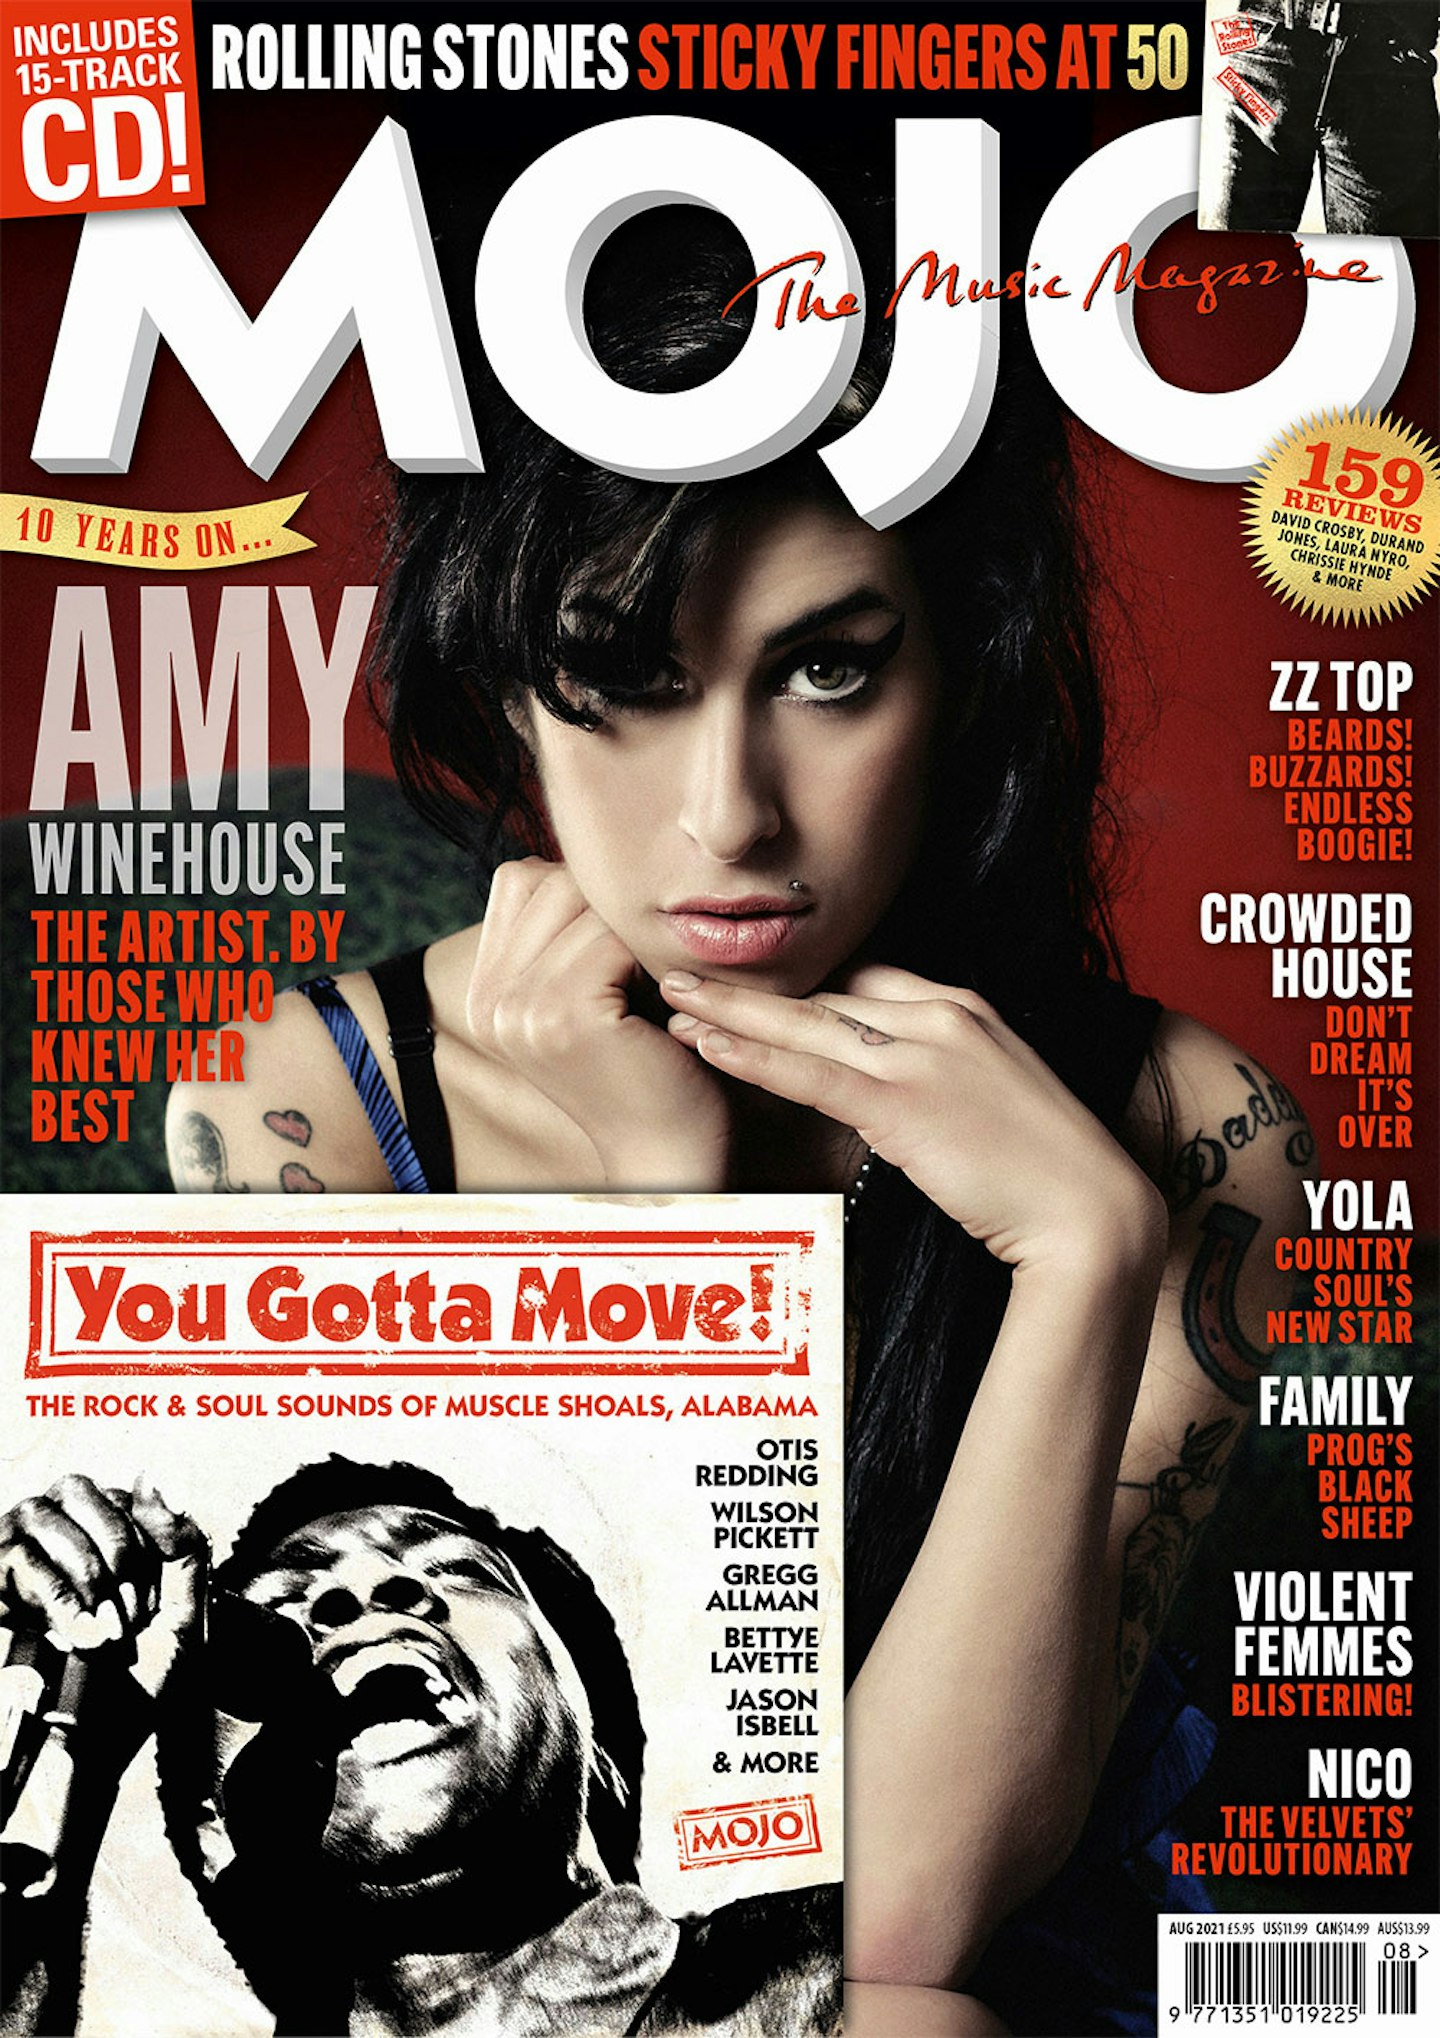 MOJO 333 magazine cover, featuring Amy Winehouse